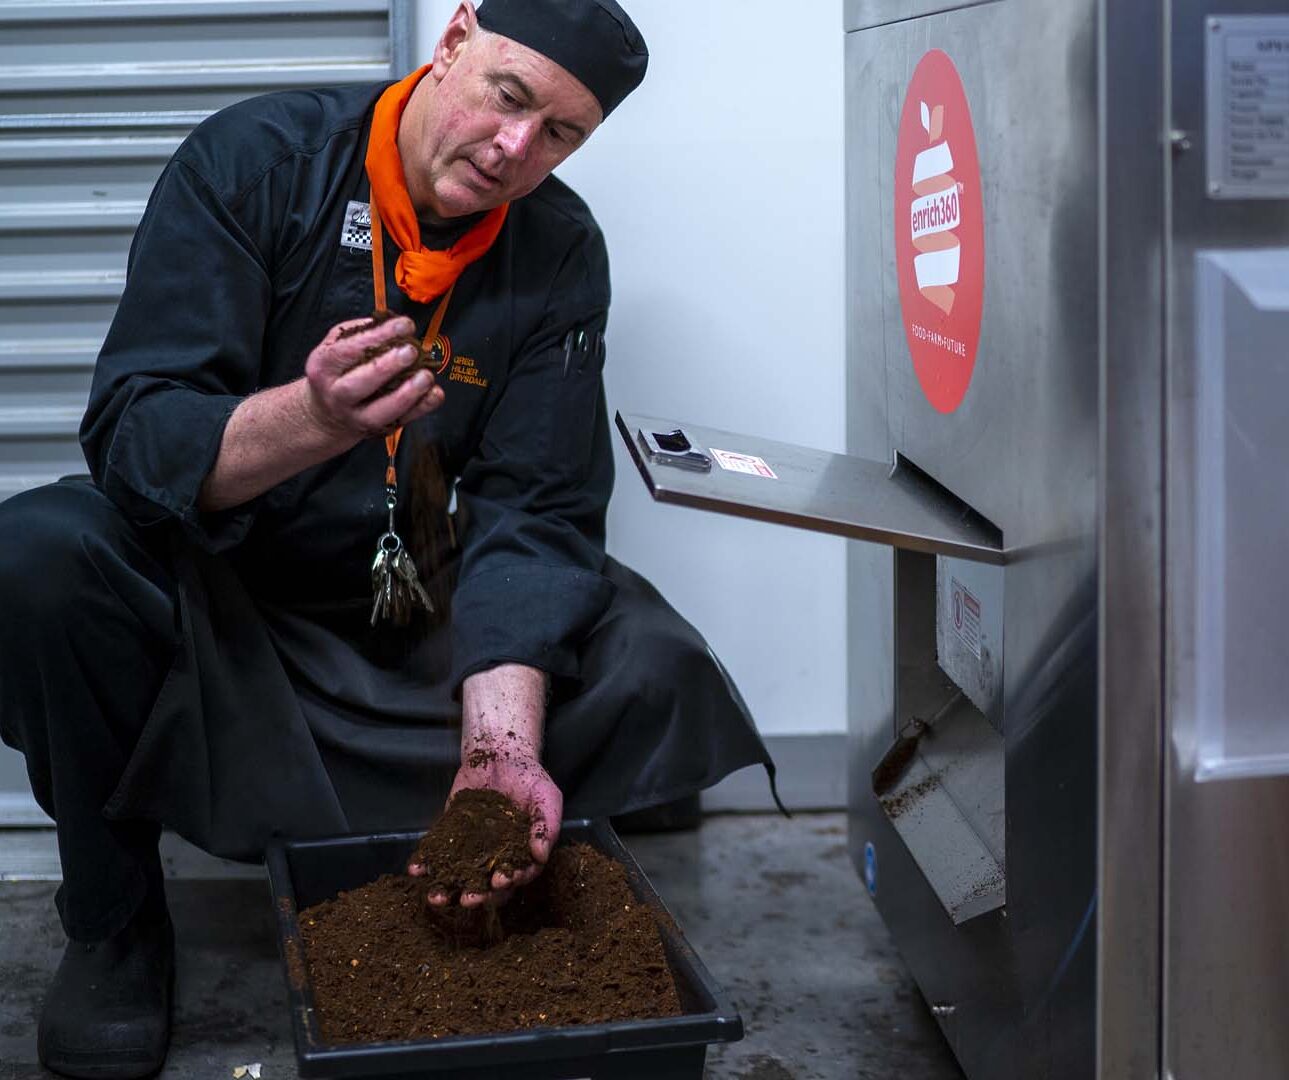 A chef inspecting compost made from restaurant food waste.